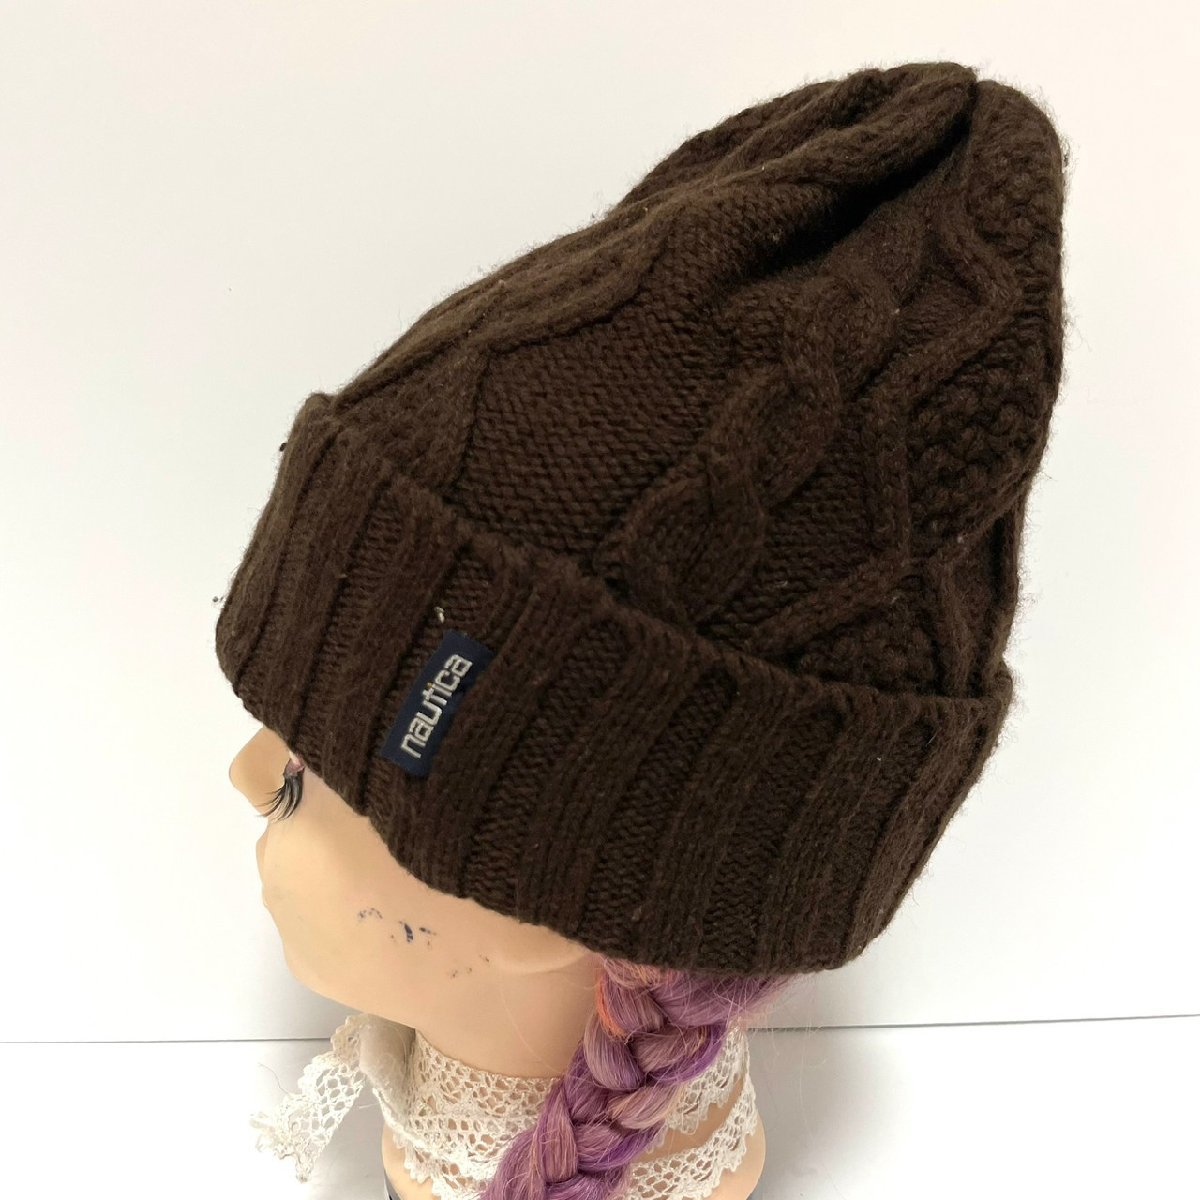 (^w^)b made in Japan Nautica cable knitted cap hat bi knee cap light brown group nautica simple casual Fisherman autumn winter C0519EE